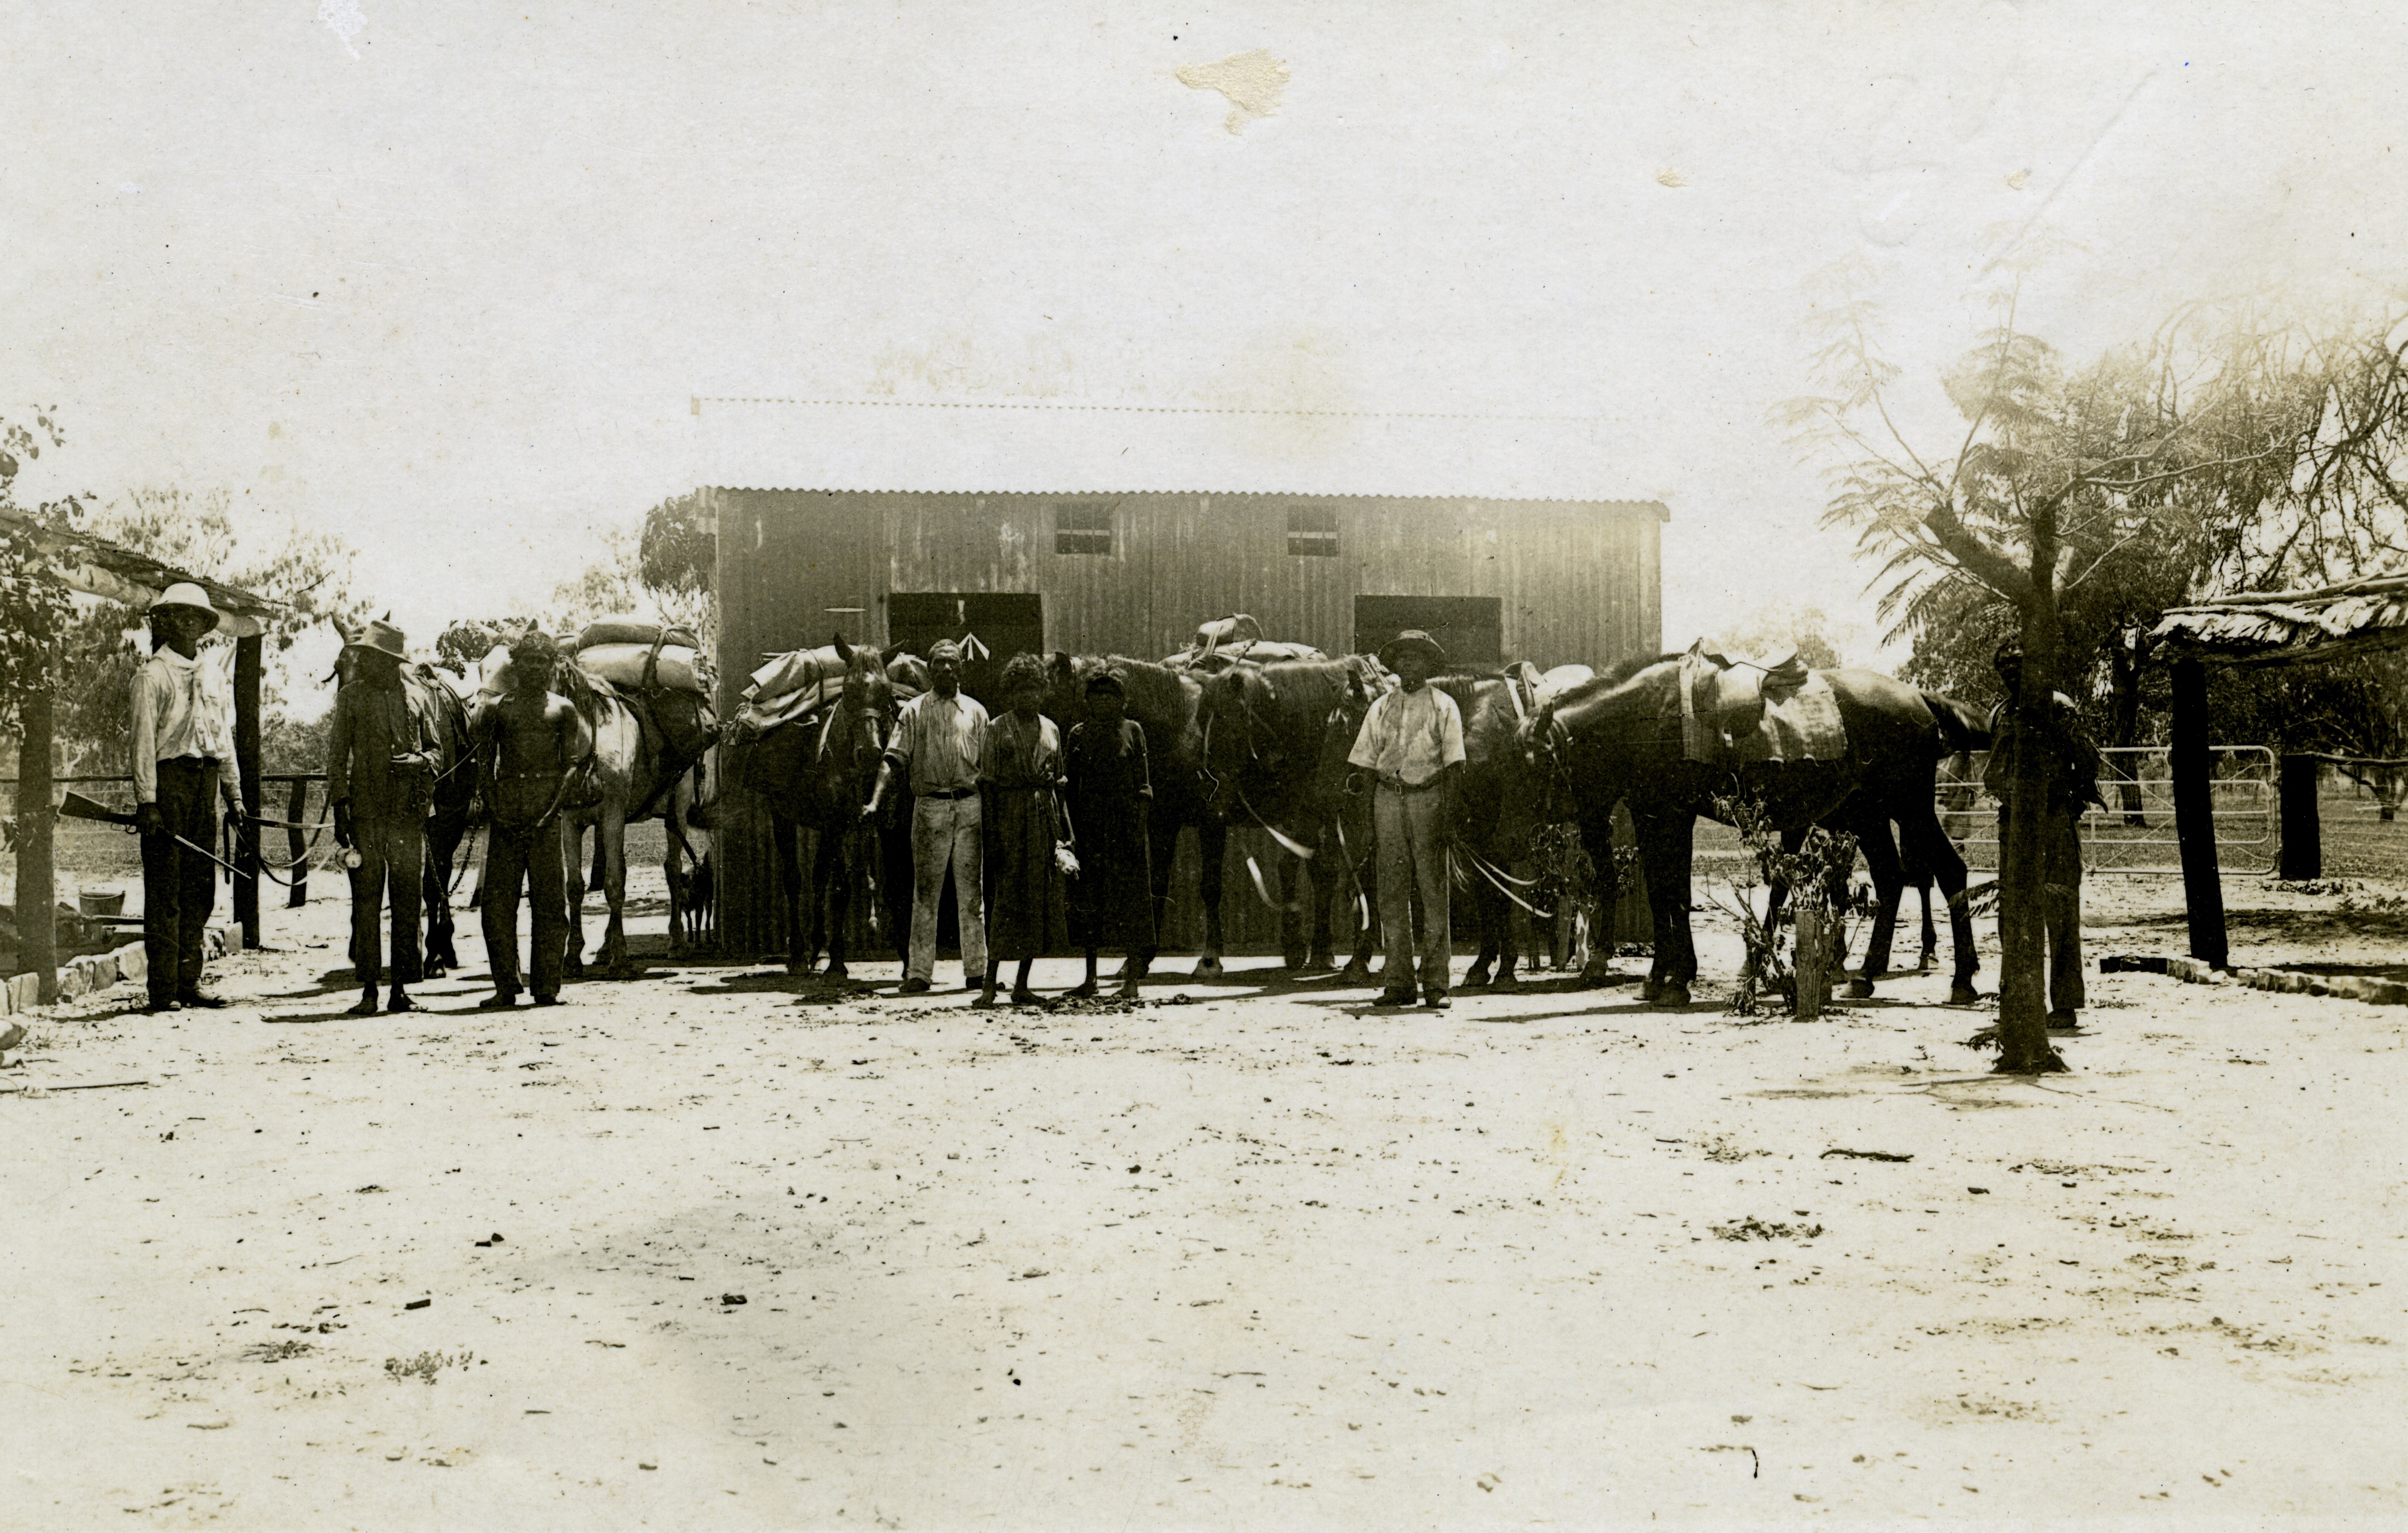 Lock-up at Police Station, Leichhardt's Bar, NT. Mounted Constable John Robert Johns is on the left. The third person from the left is Neighbour. He is a prisoner in chains which are held by the man second from the left.